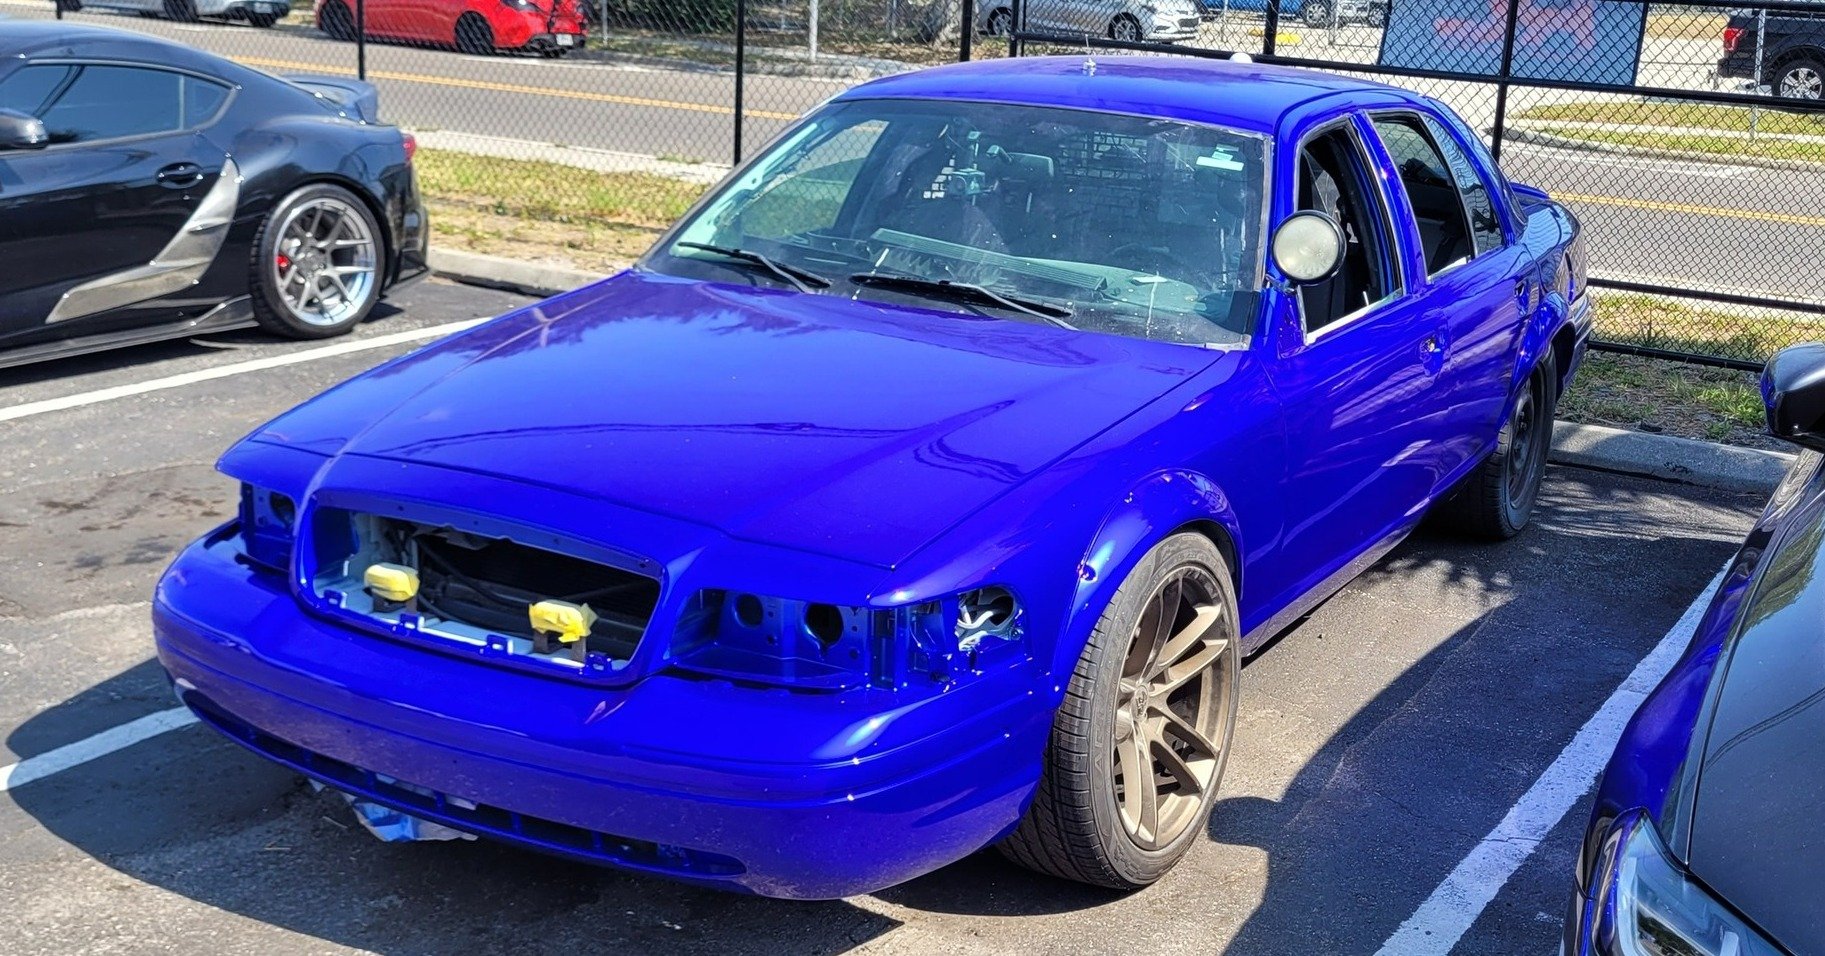 🚔 Crown Vic update! 🚔 Now THAT is blue! The extreme makeover of #38, BPD's last Crown Vic, is speeding ahead, and our friends at The Shop are pulling out all the stops! The Shop saved #38 from the auction block and, along with its partners, is gene